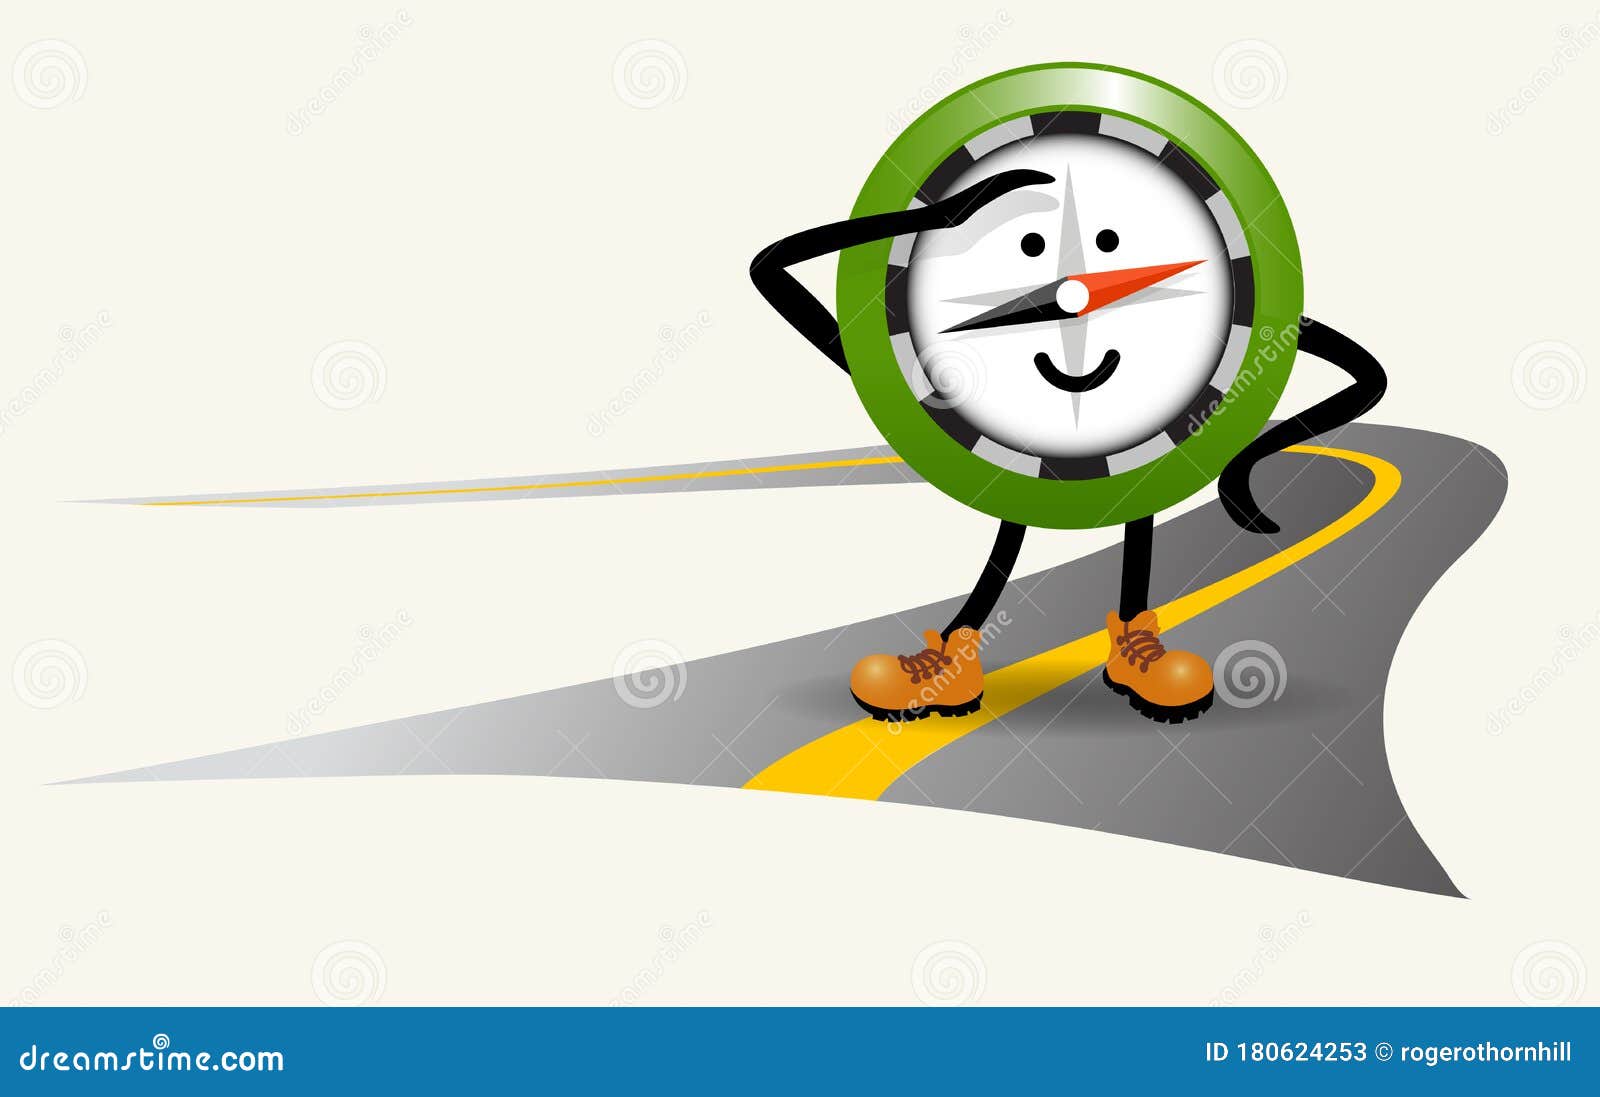 cute navigational compass character standing on a road in hiking boots.